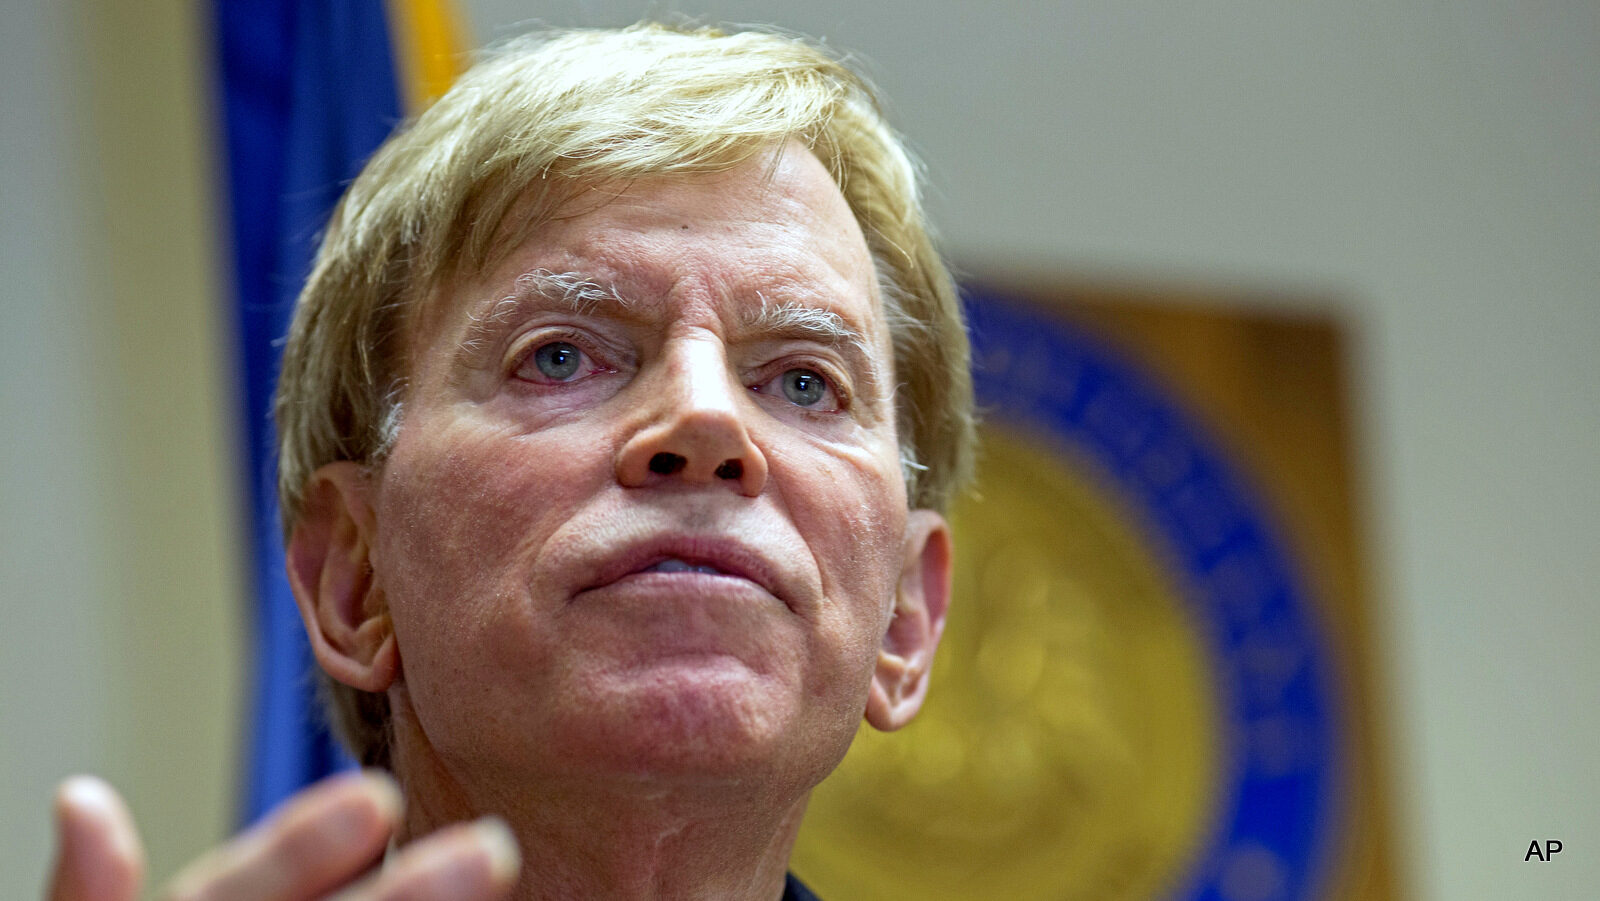 Former Ku Klux Klan leader David Duke talks to the media at the Louisiana Secretary of State's office in Baton Rouge, La. And far from hiding in chat rooms or under white sheets, they cheered the GOP presidential nominee inside the Republican National Convention over the last week. While not official delegates, they nevertheless obtained credentials to attend the party’s highest-profile quadrennial gathering. Donald Trump has publicly disavowed the white supremacist movement when pressed by journalists. Seizing on the energy, Duke on Friday announced a bid for the Senate.